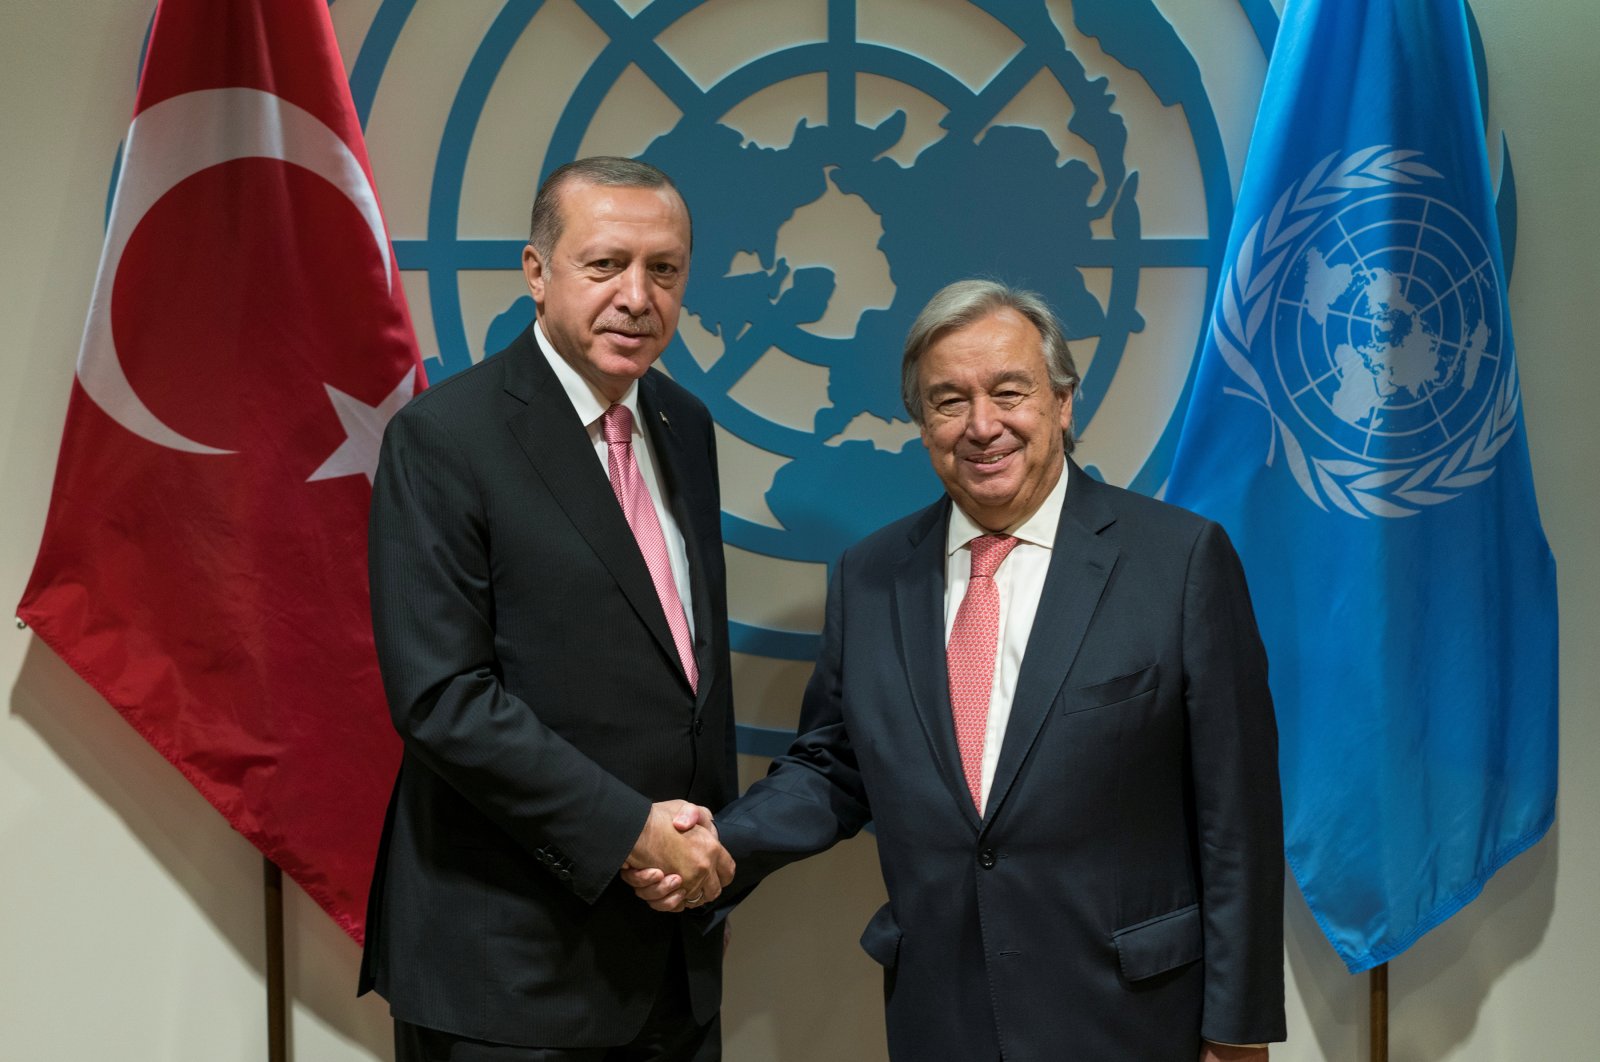 President Recep Tayyip Erdoğan meets with United Nations Secretary-General Antonio Guterres on the sidelines of the 72nd U.N. General Assembly at U.N. Headquarters in Manhattan, New York, U.S., Sept. 19, 2017. (Reuters File Photo)